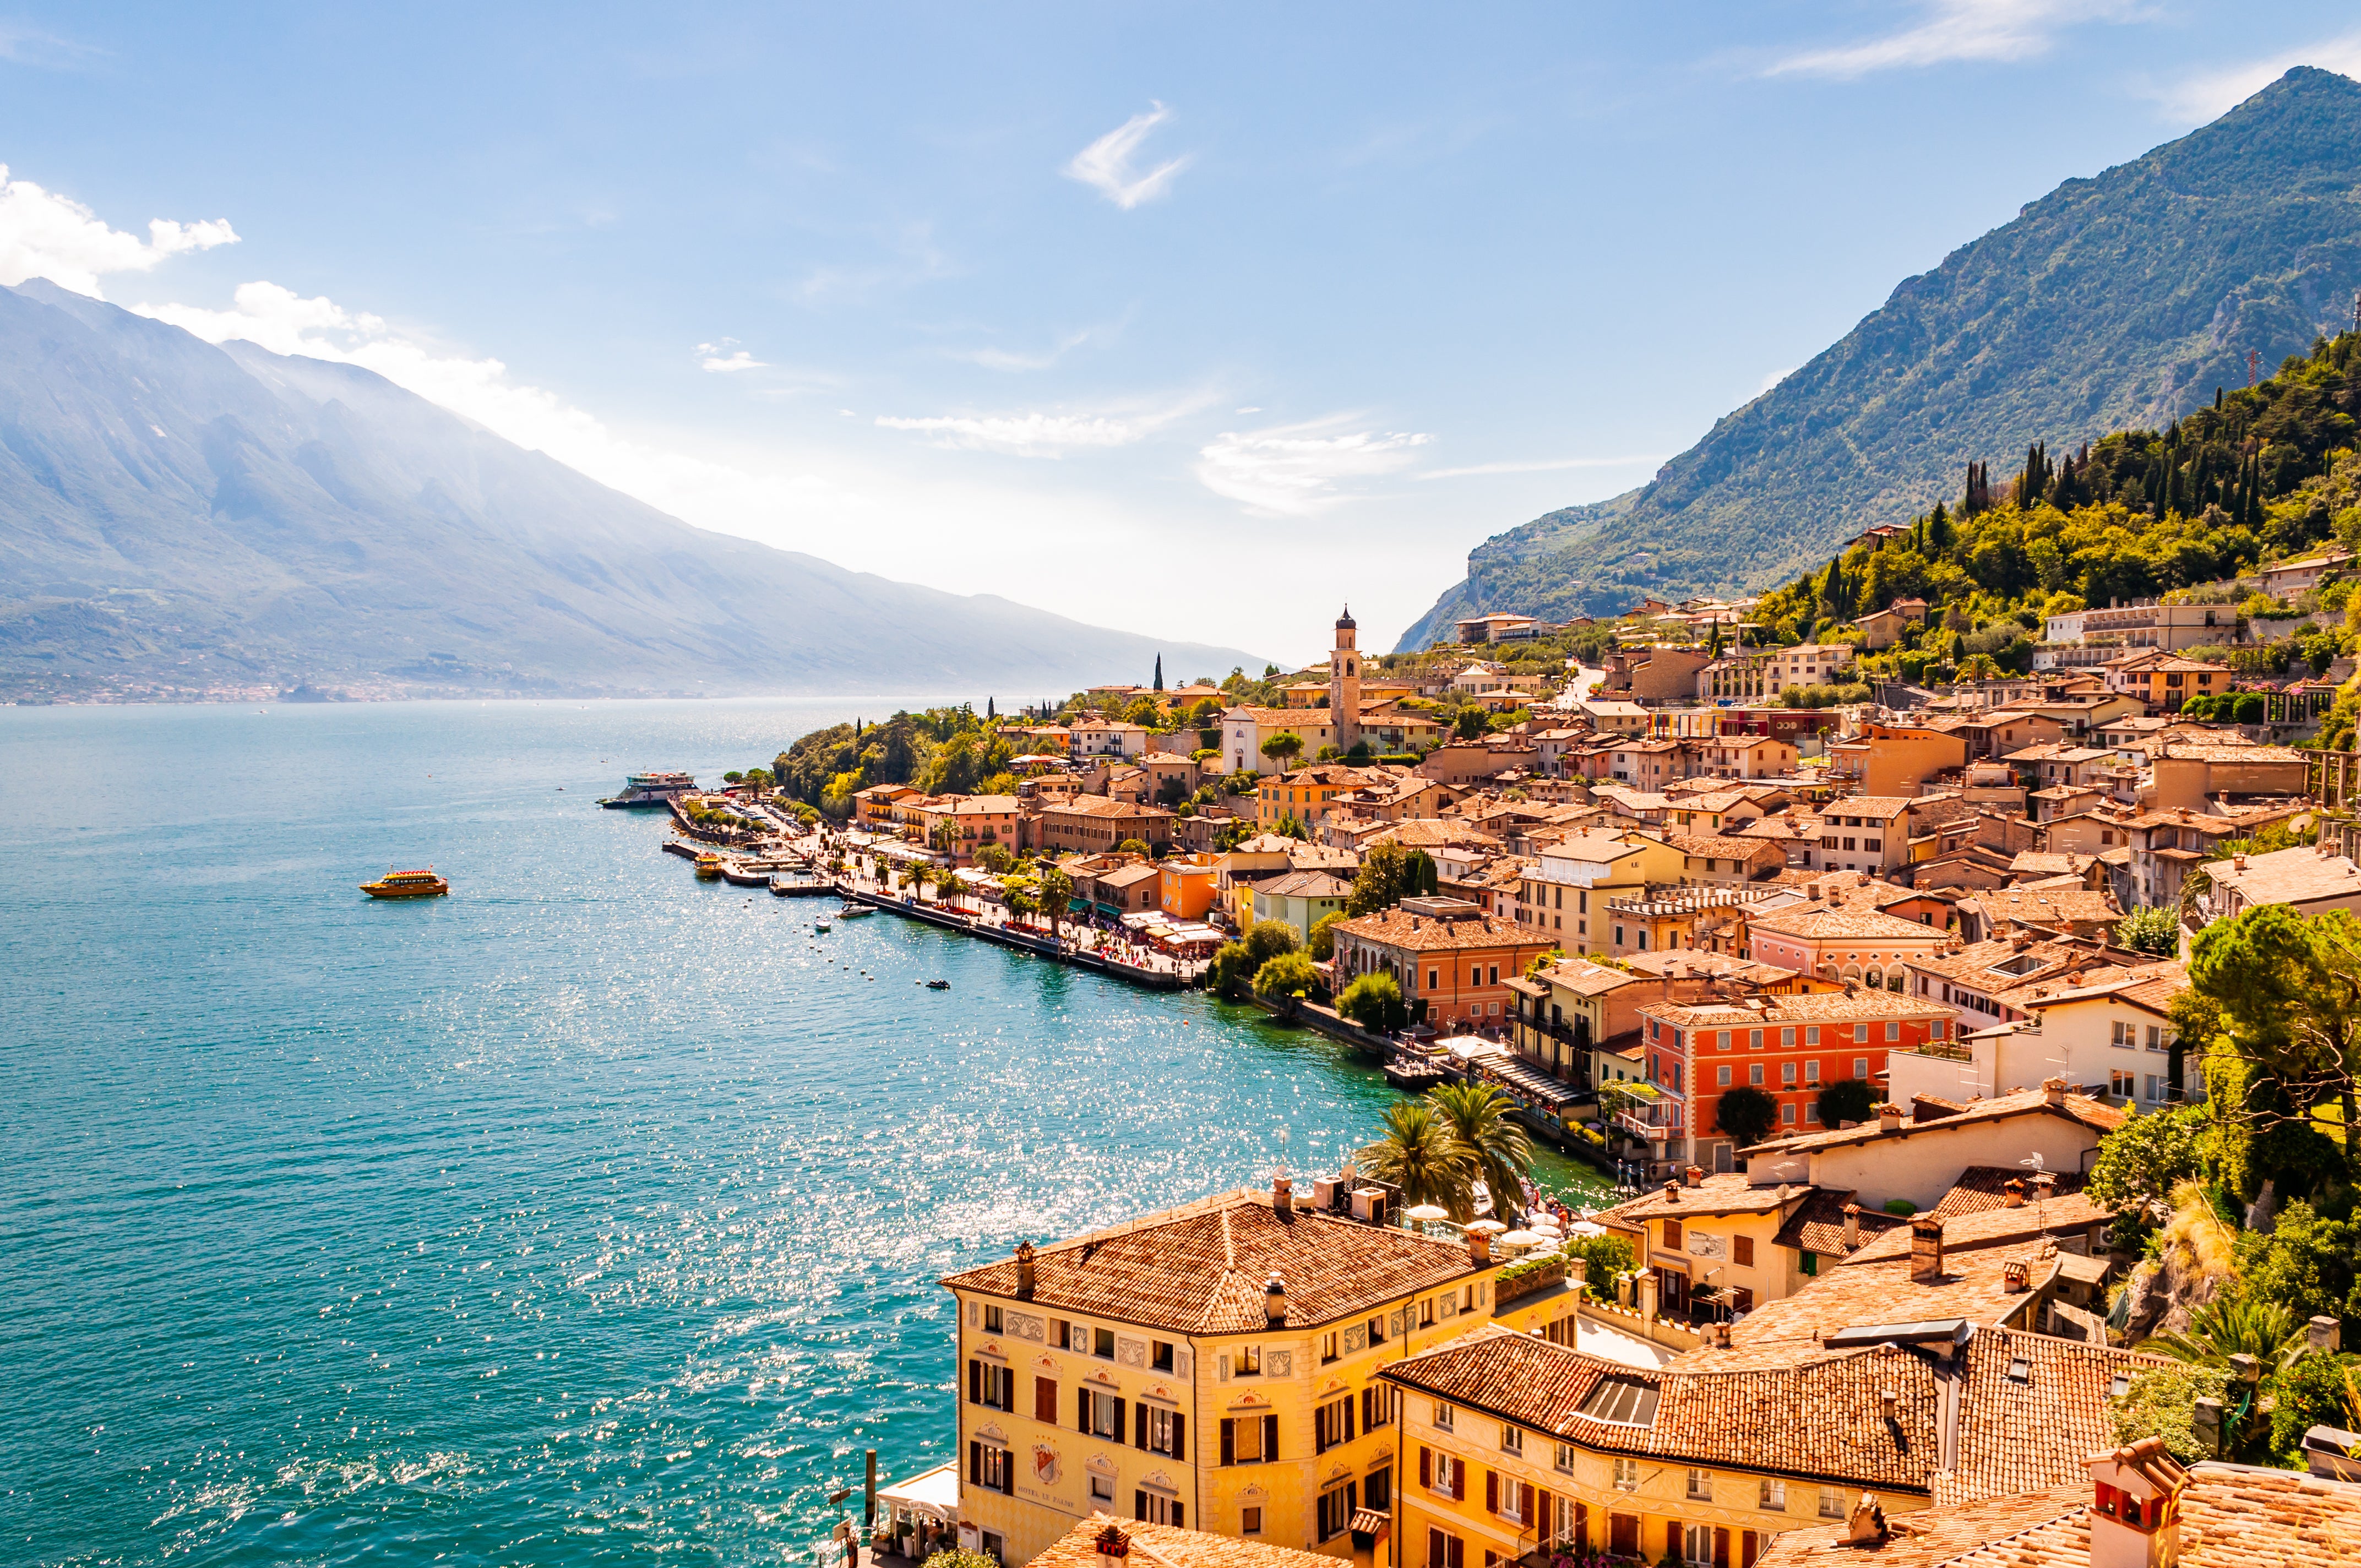 The shores of Lake Garda are home to some of the most popular Italian cities